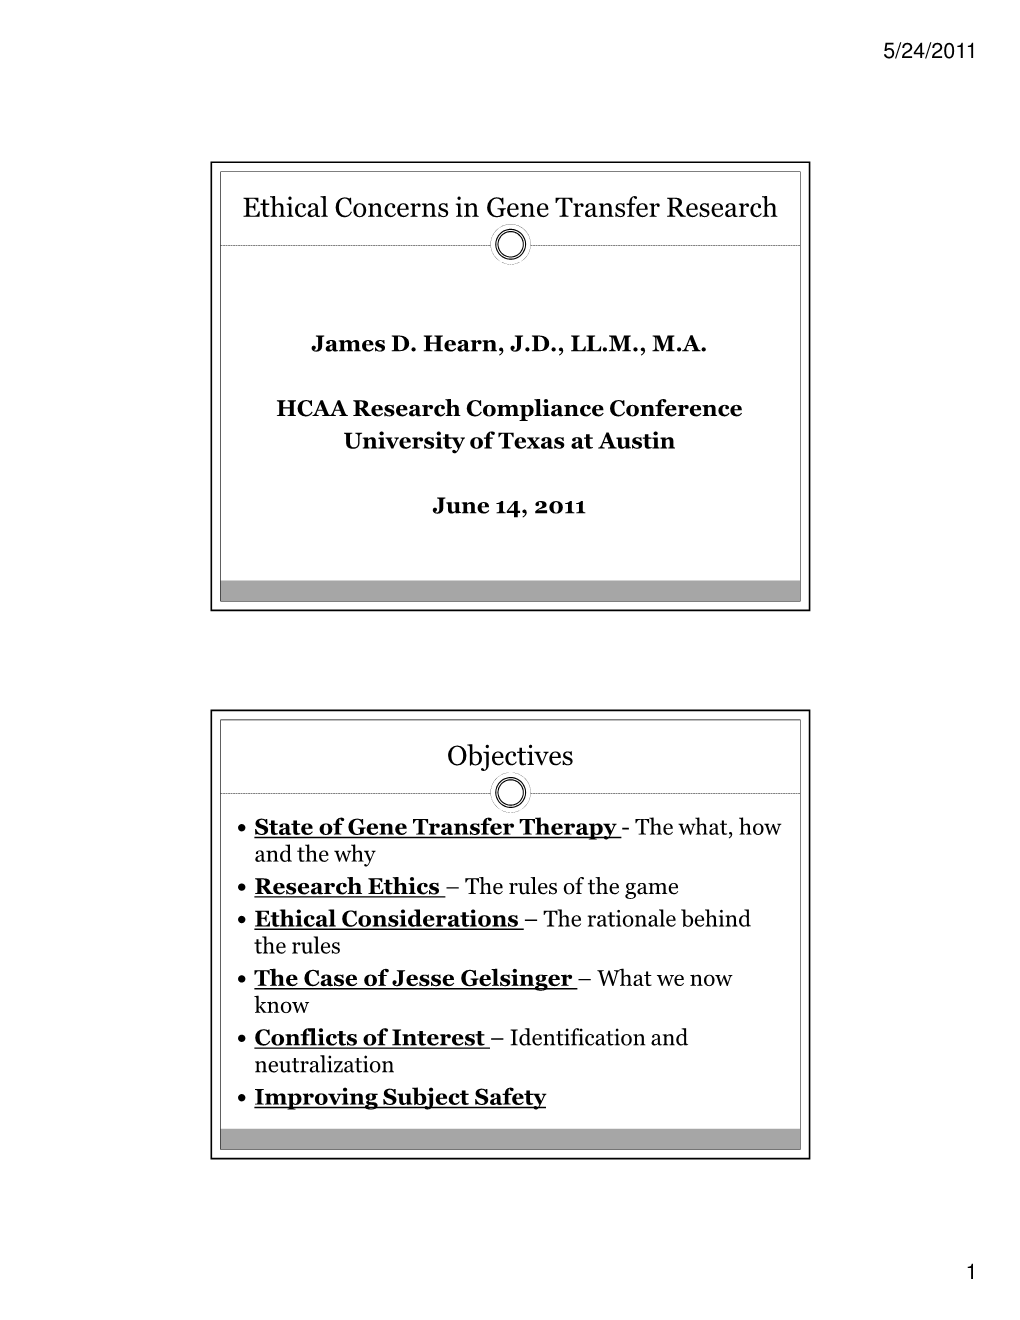 Ethical Concerns in Gene Transfer Research Objectives